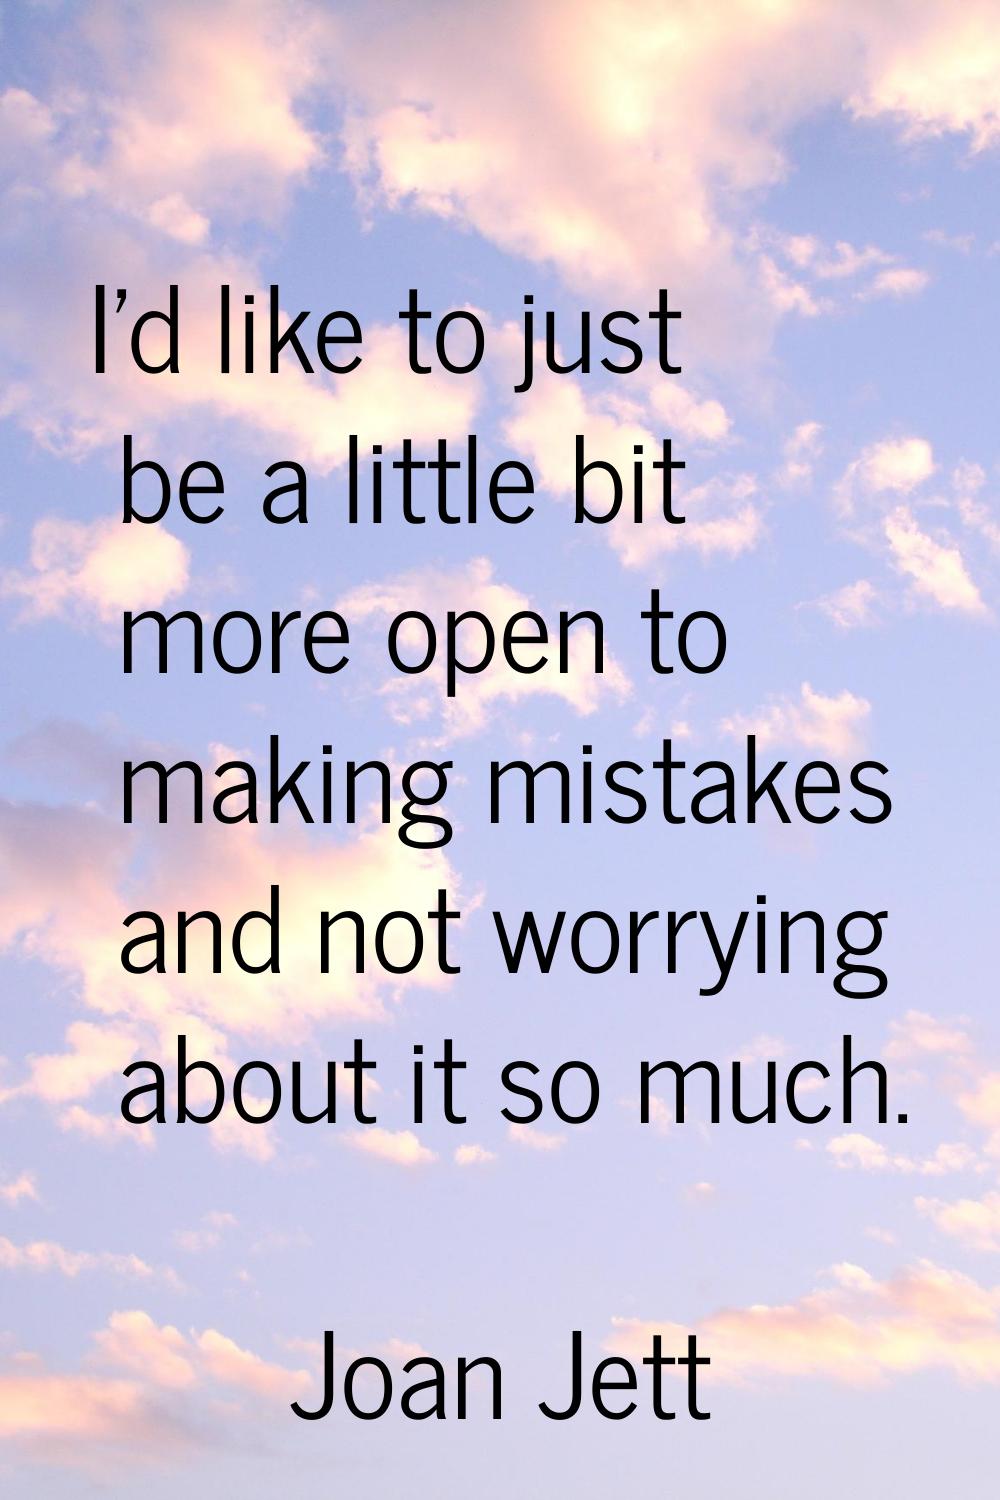 I'd like to just be a little bit more open to making mistakes and not worrying about it so much.